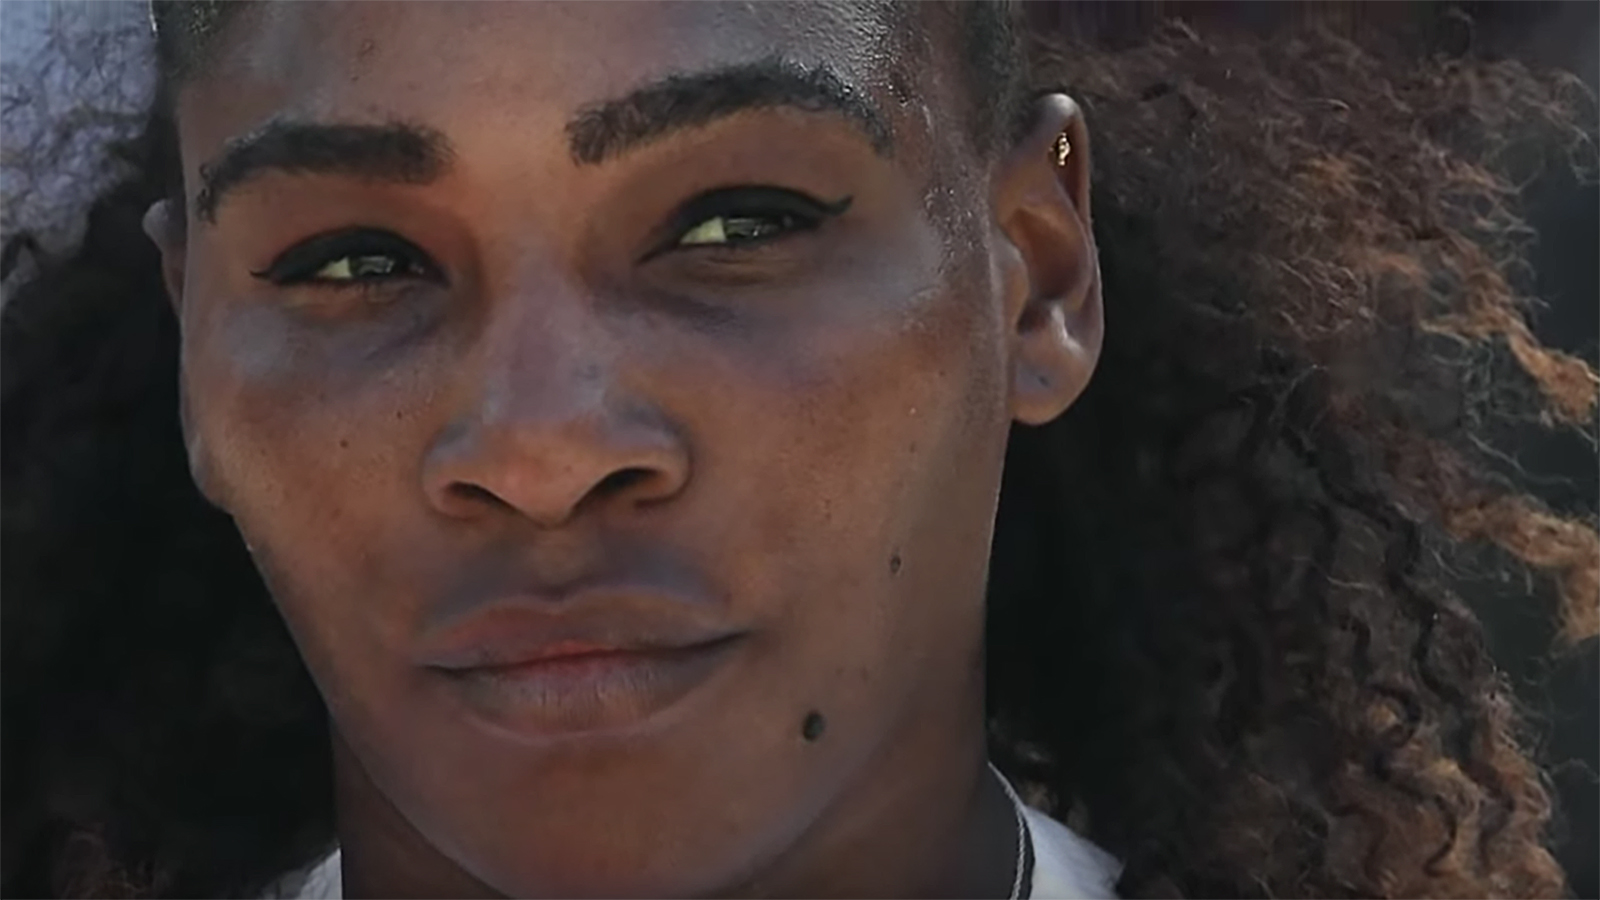 serena williams crazy nike commercial